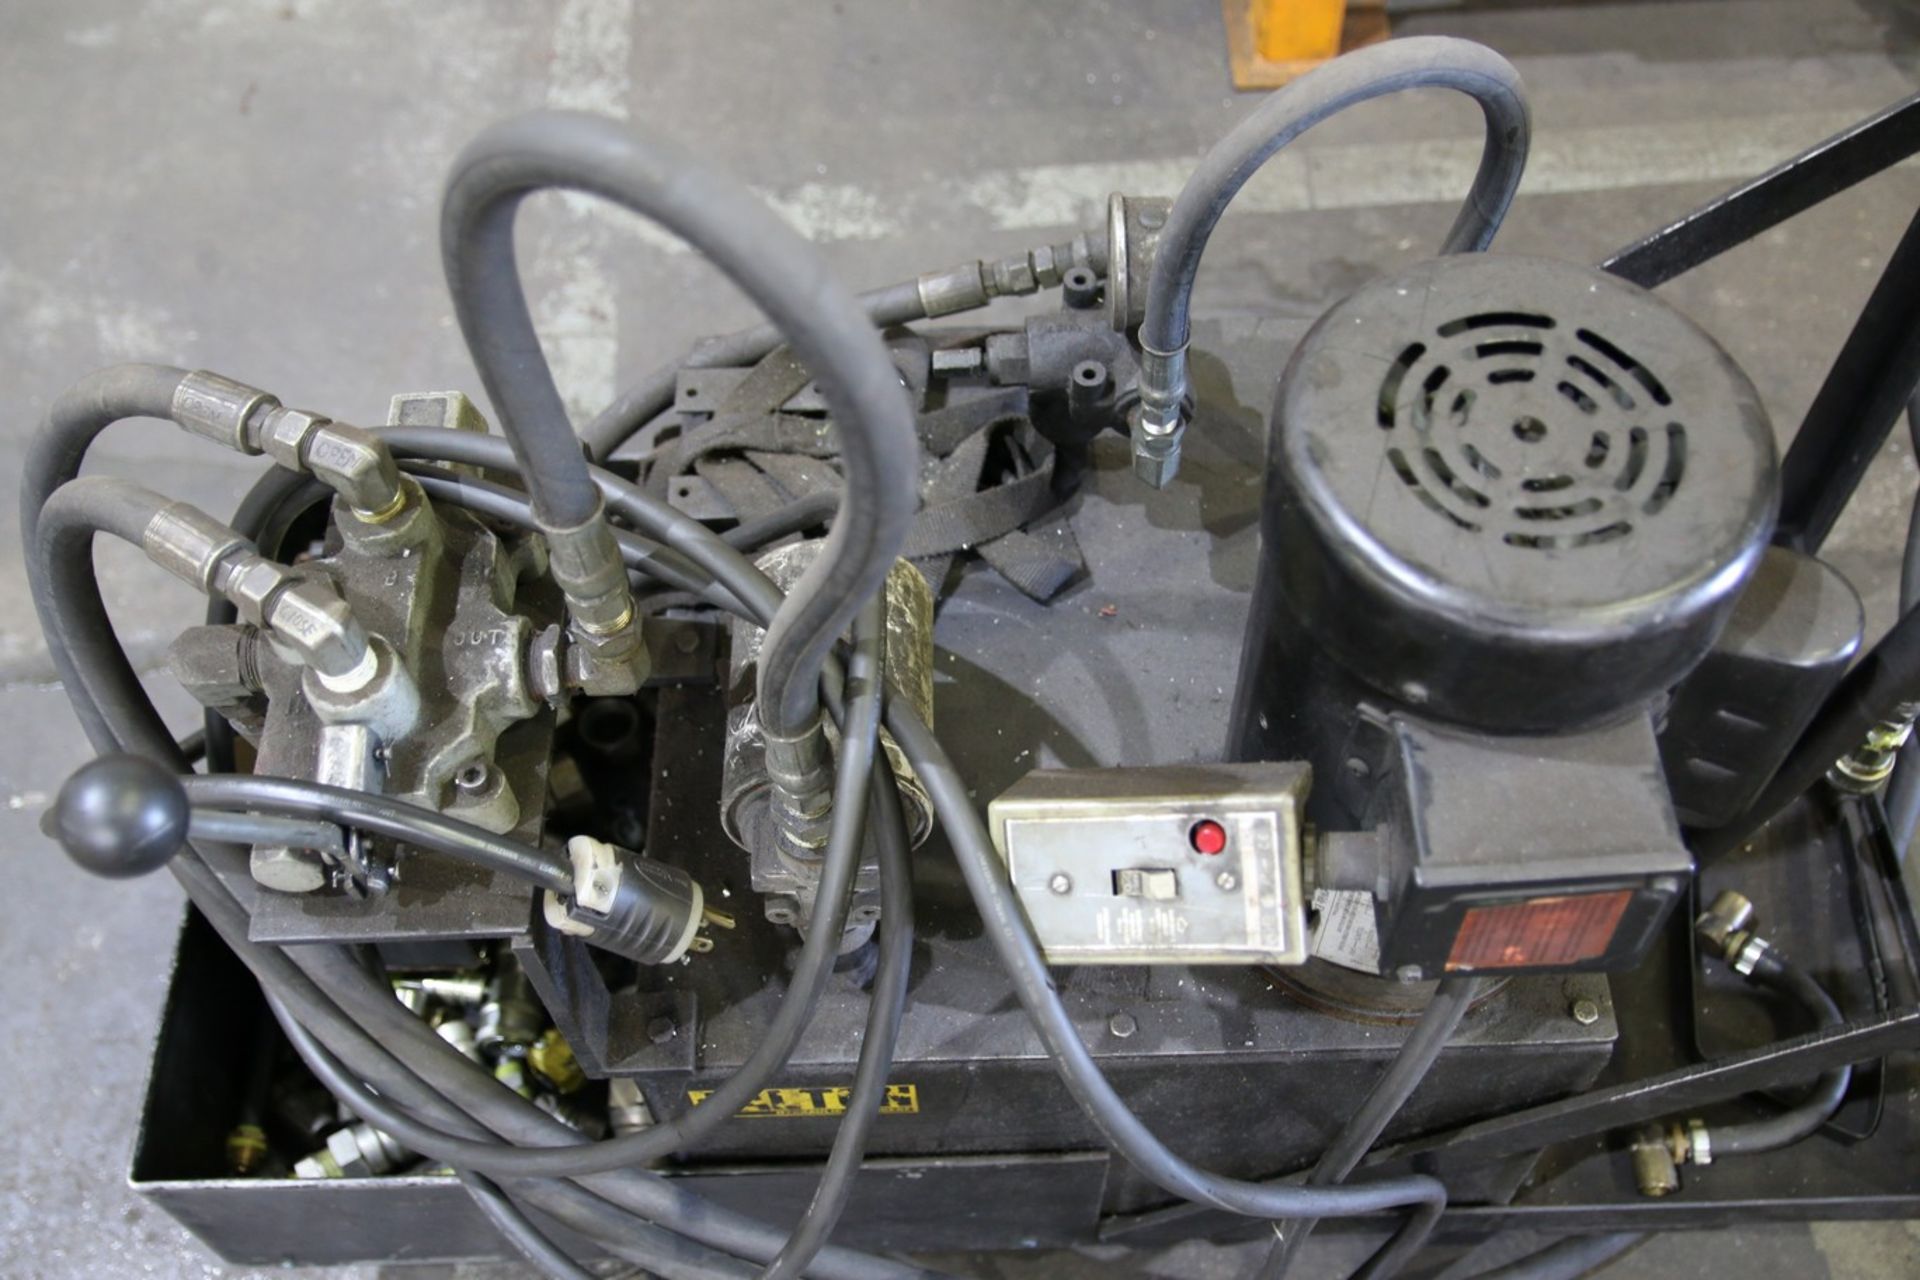 Dalton Dalton Hydraulic Pump with Cart, Hoses and Various Fittings - Image 3 of 3